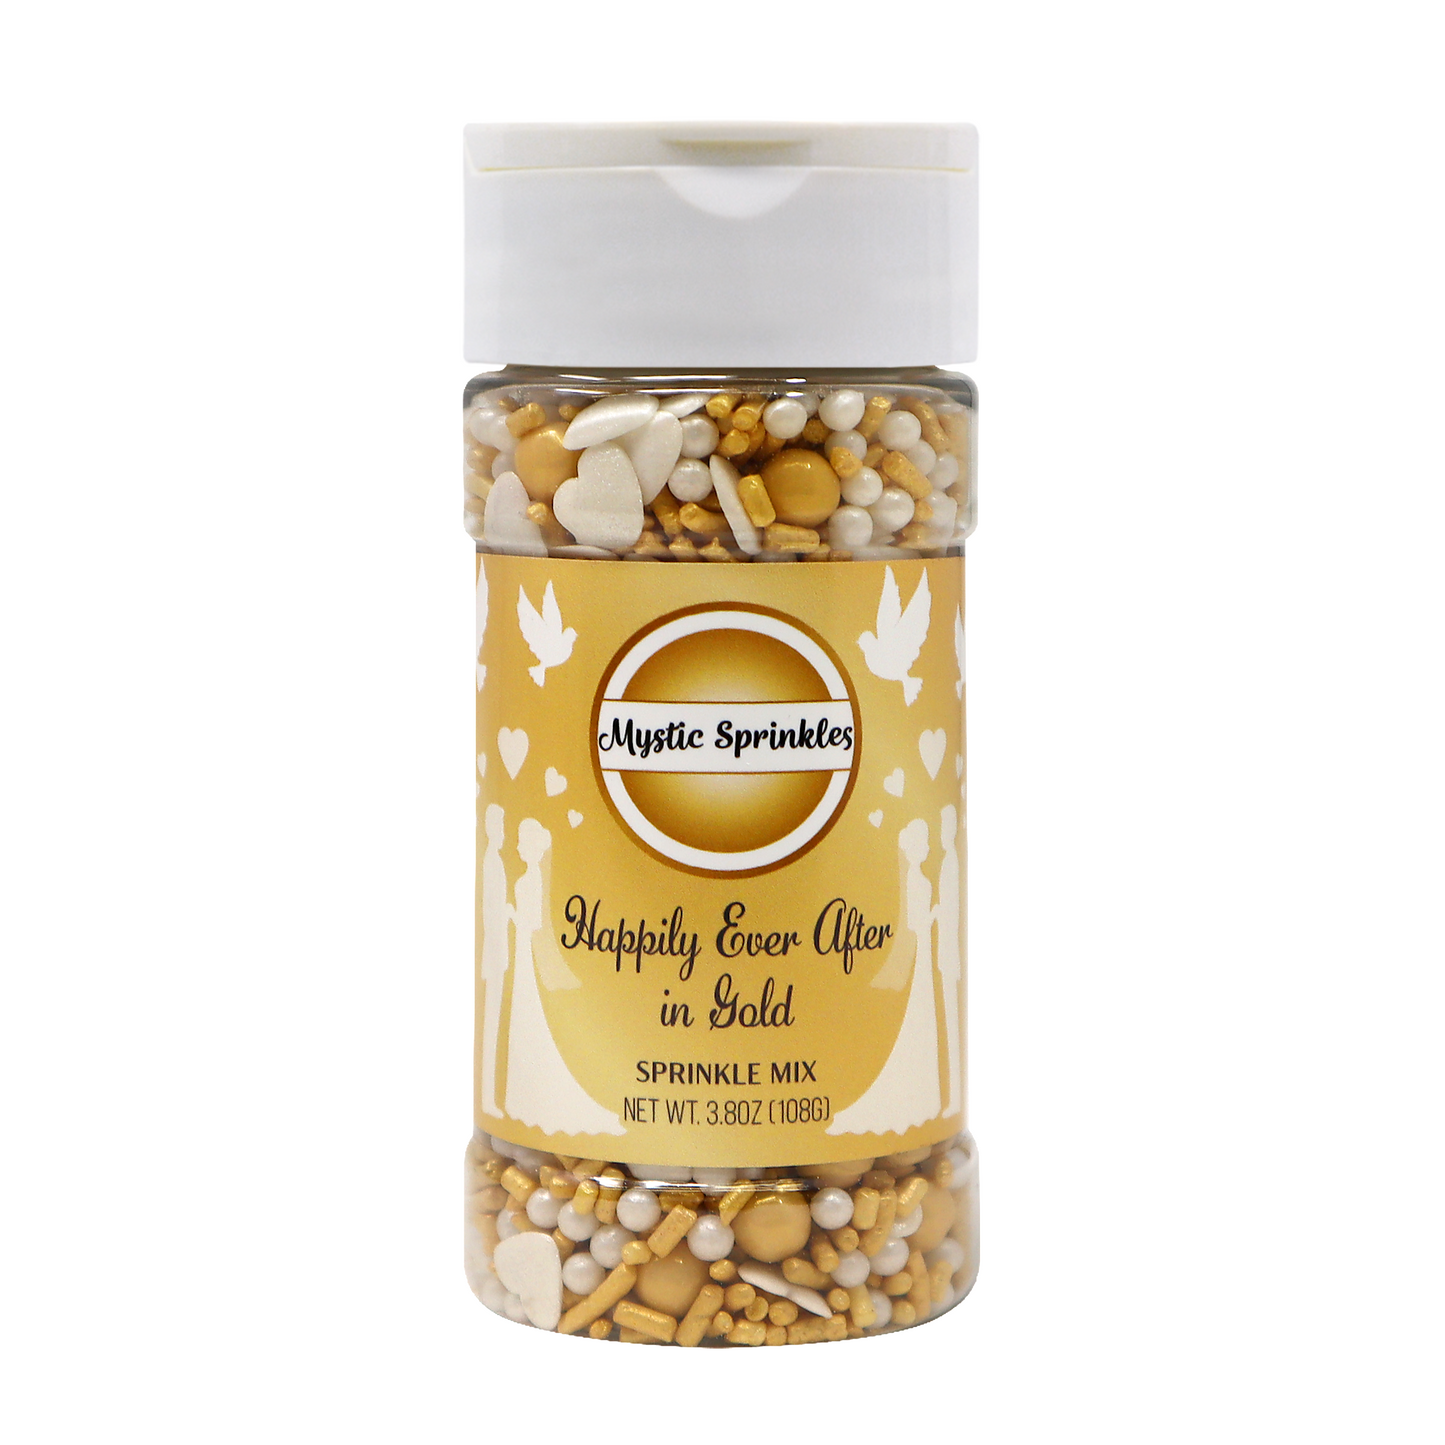 Happily Ever After in Gold Sprinkle Mix 3.6oz